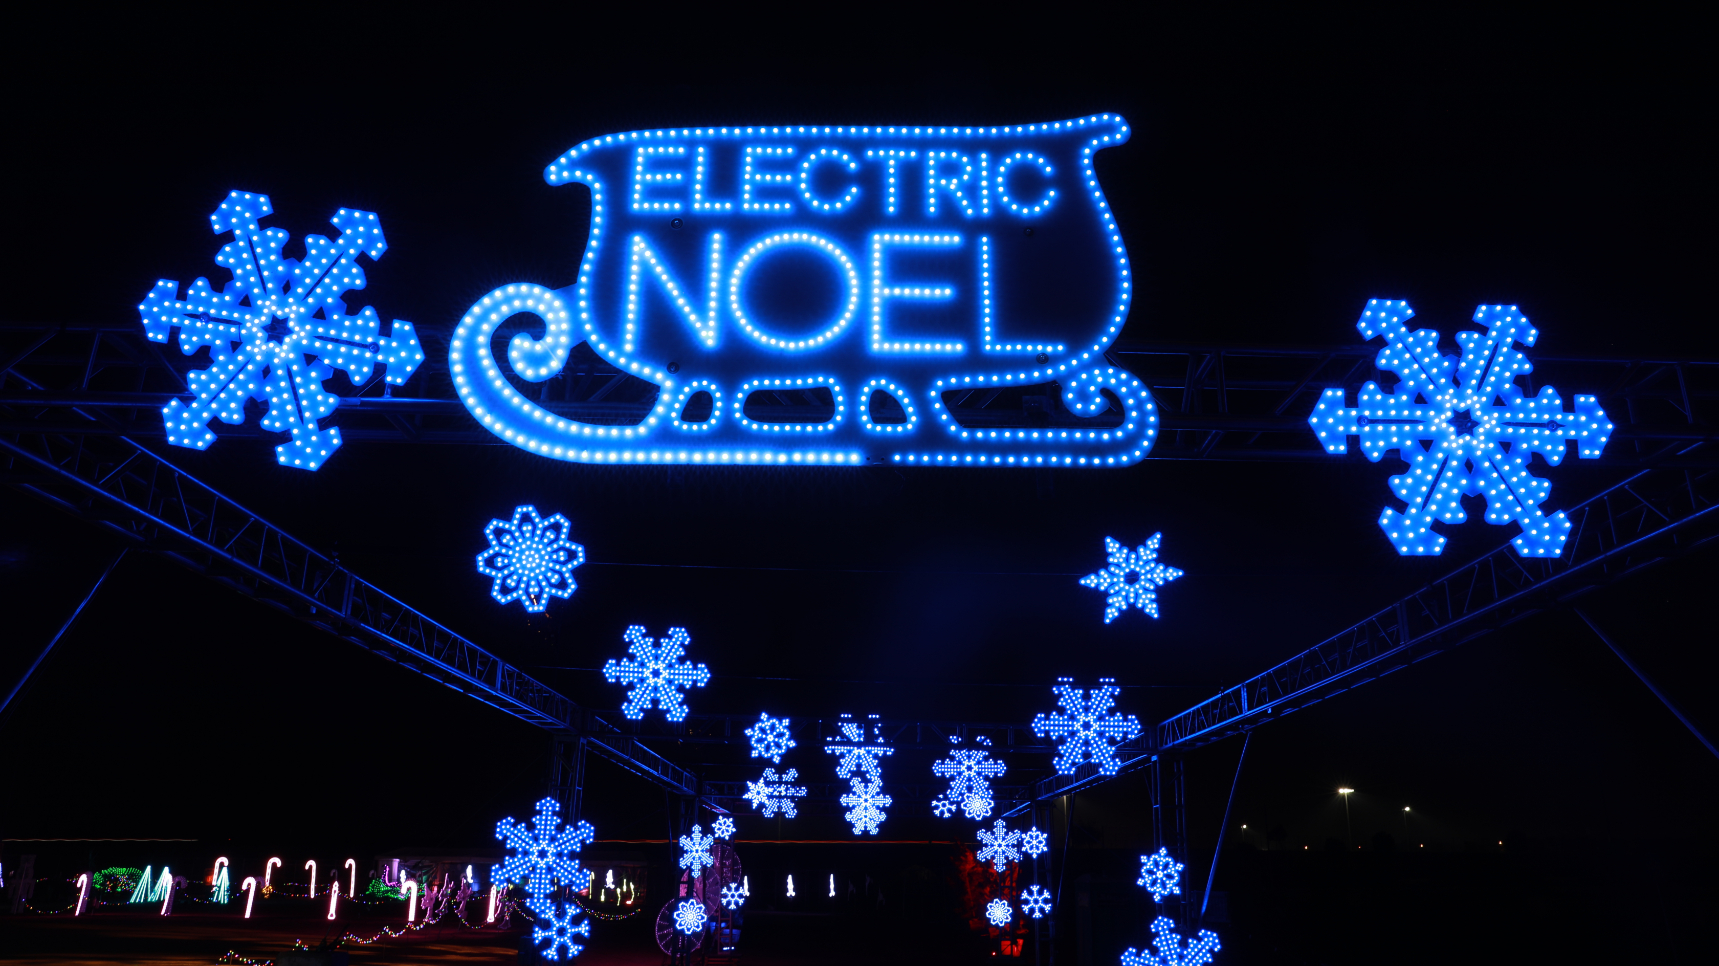 The Electric Noel Drive Thru Christmas Experience runs through Jan. 3 in Norco, CA. The event benefits Save Our Souls, a nonprofit dedicated to supporting mental wellness. Alki David's Hologram USA donated the technology to bring Hologram Santa to life.The event will also raffle off a surfboard donated by Kelly Slater and painted by street artist Retna. Tickets at ElectricNoel.com
